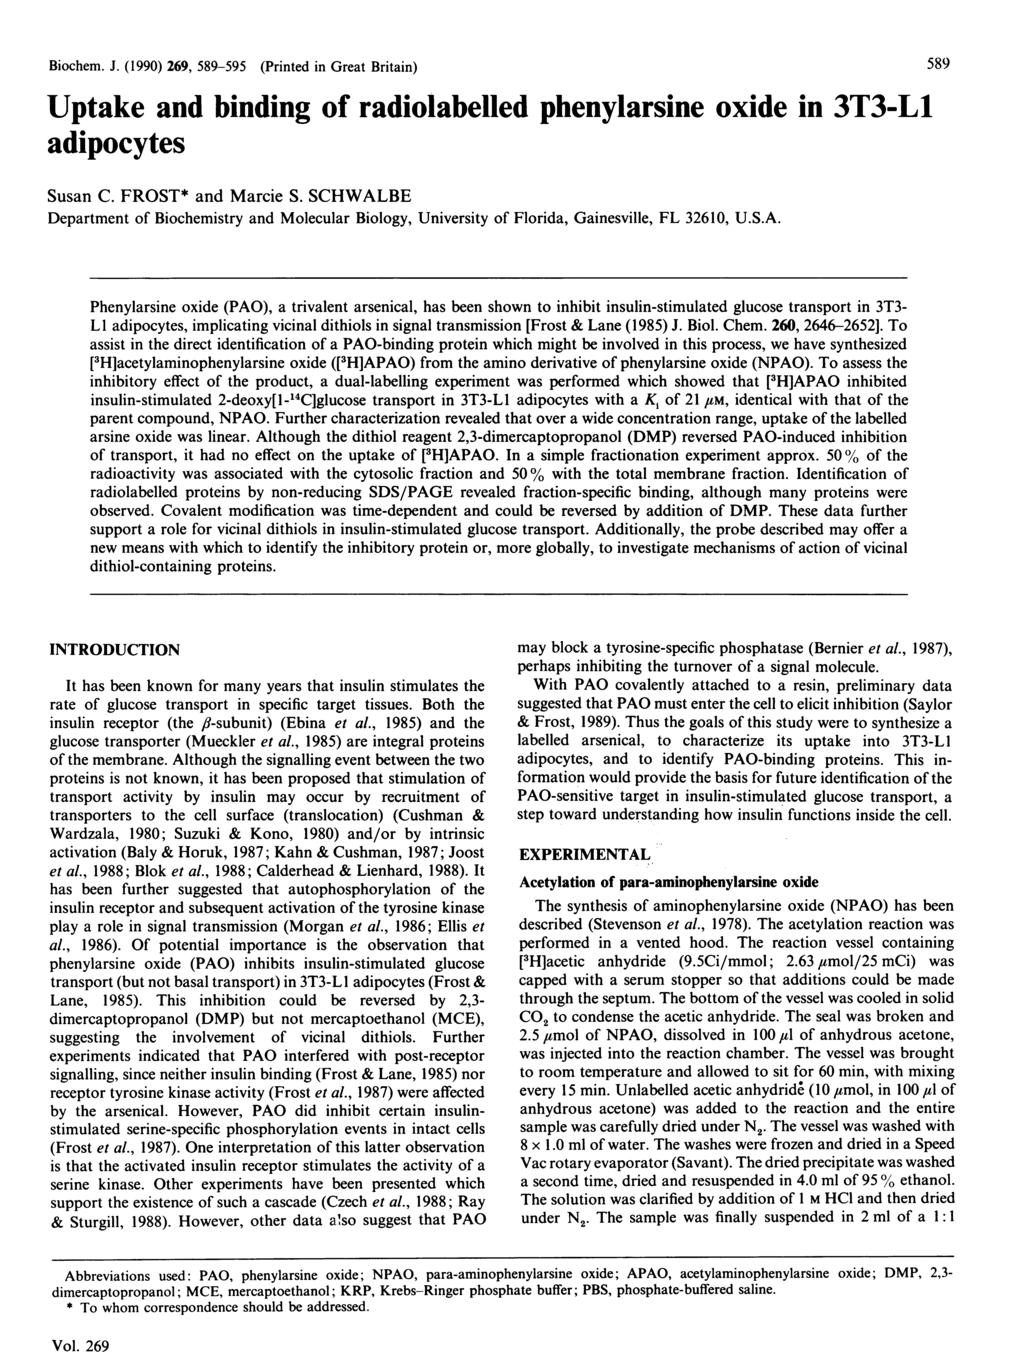 Biohem. J. (199) 269, 589-595 (Printed in Great Britain) Uptake and binding of radiolabelled phenylarsine oide in 3T3-L1 adipoytes Susan C. FROST* and Marie S.